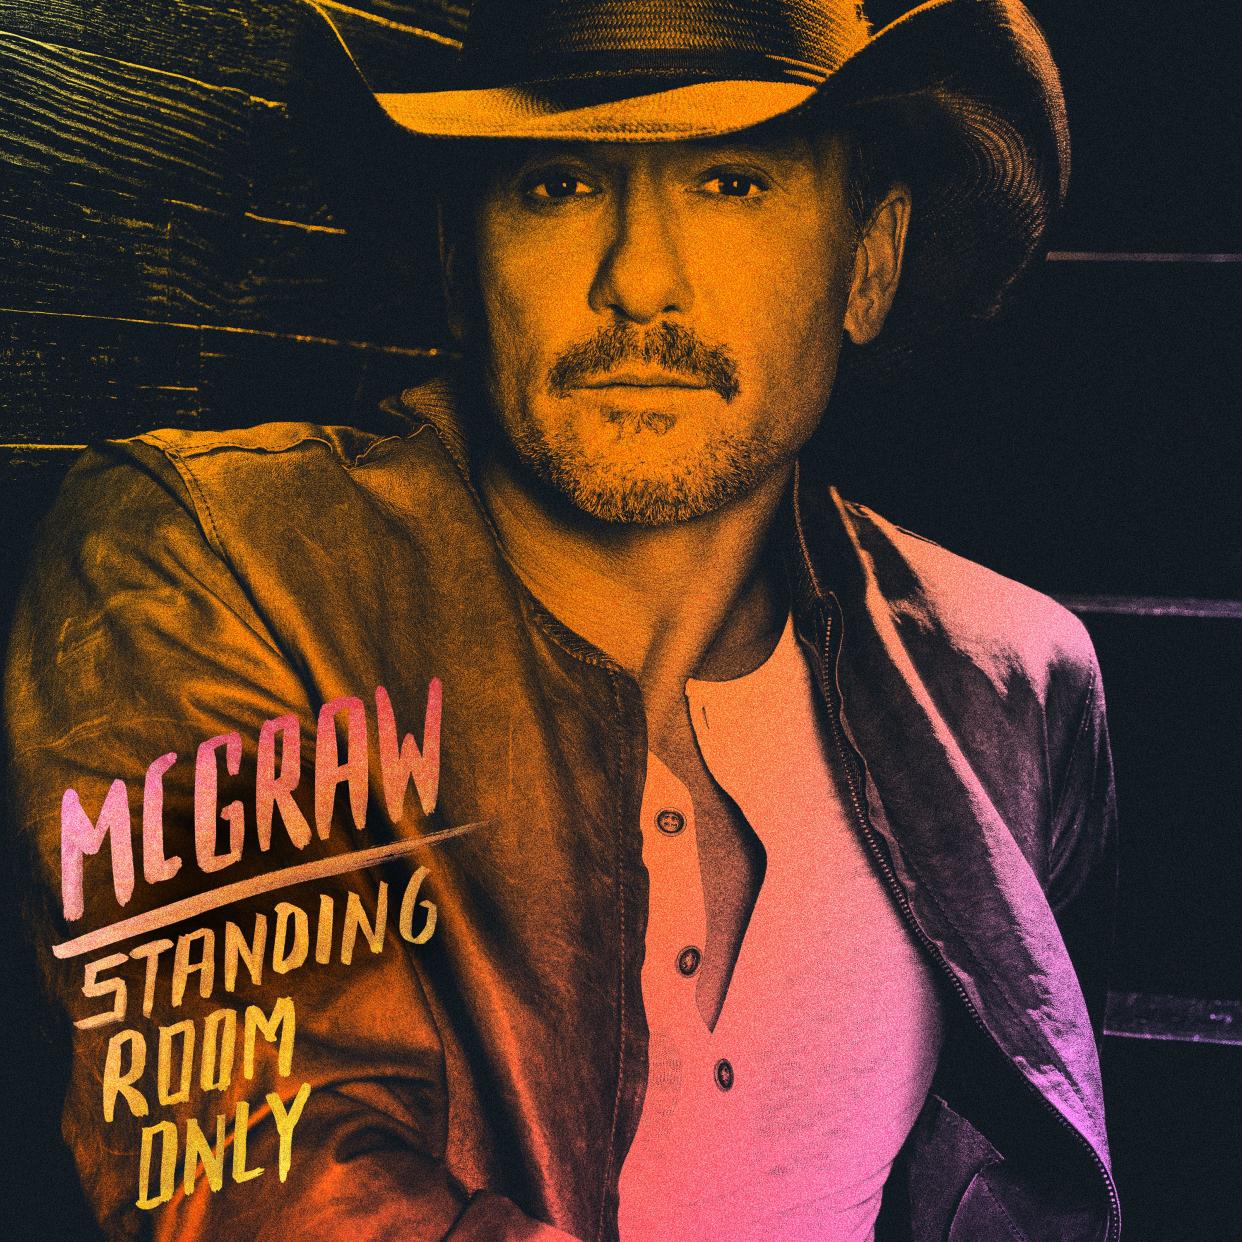 Tim McGraw releases "Standing Room Only" on Friday, his first new album since 2020.